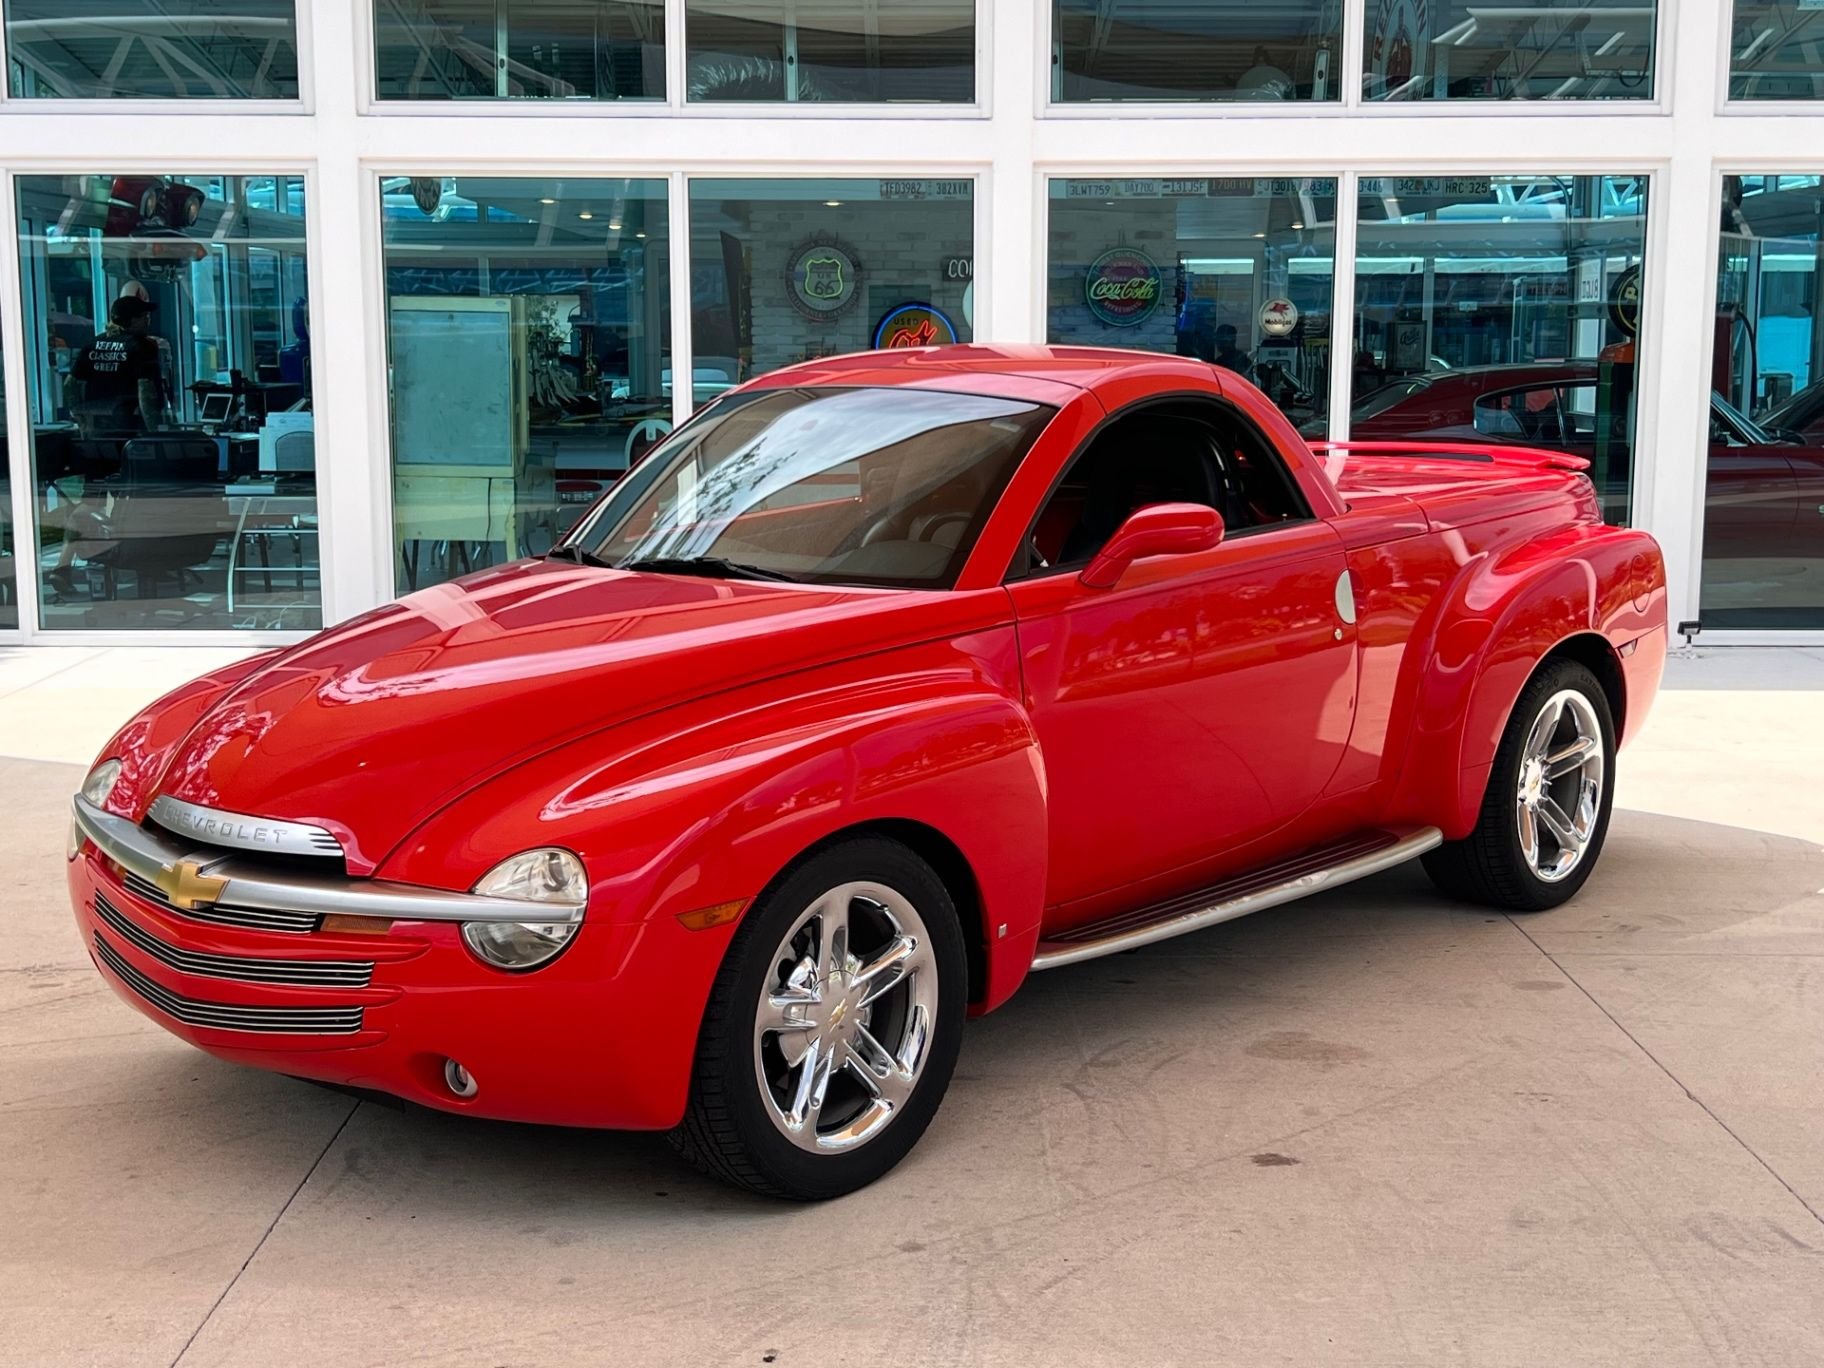 2004 Chevrolet SSR | Classic Cars & Used Cars For Sale in Tampa, FL